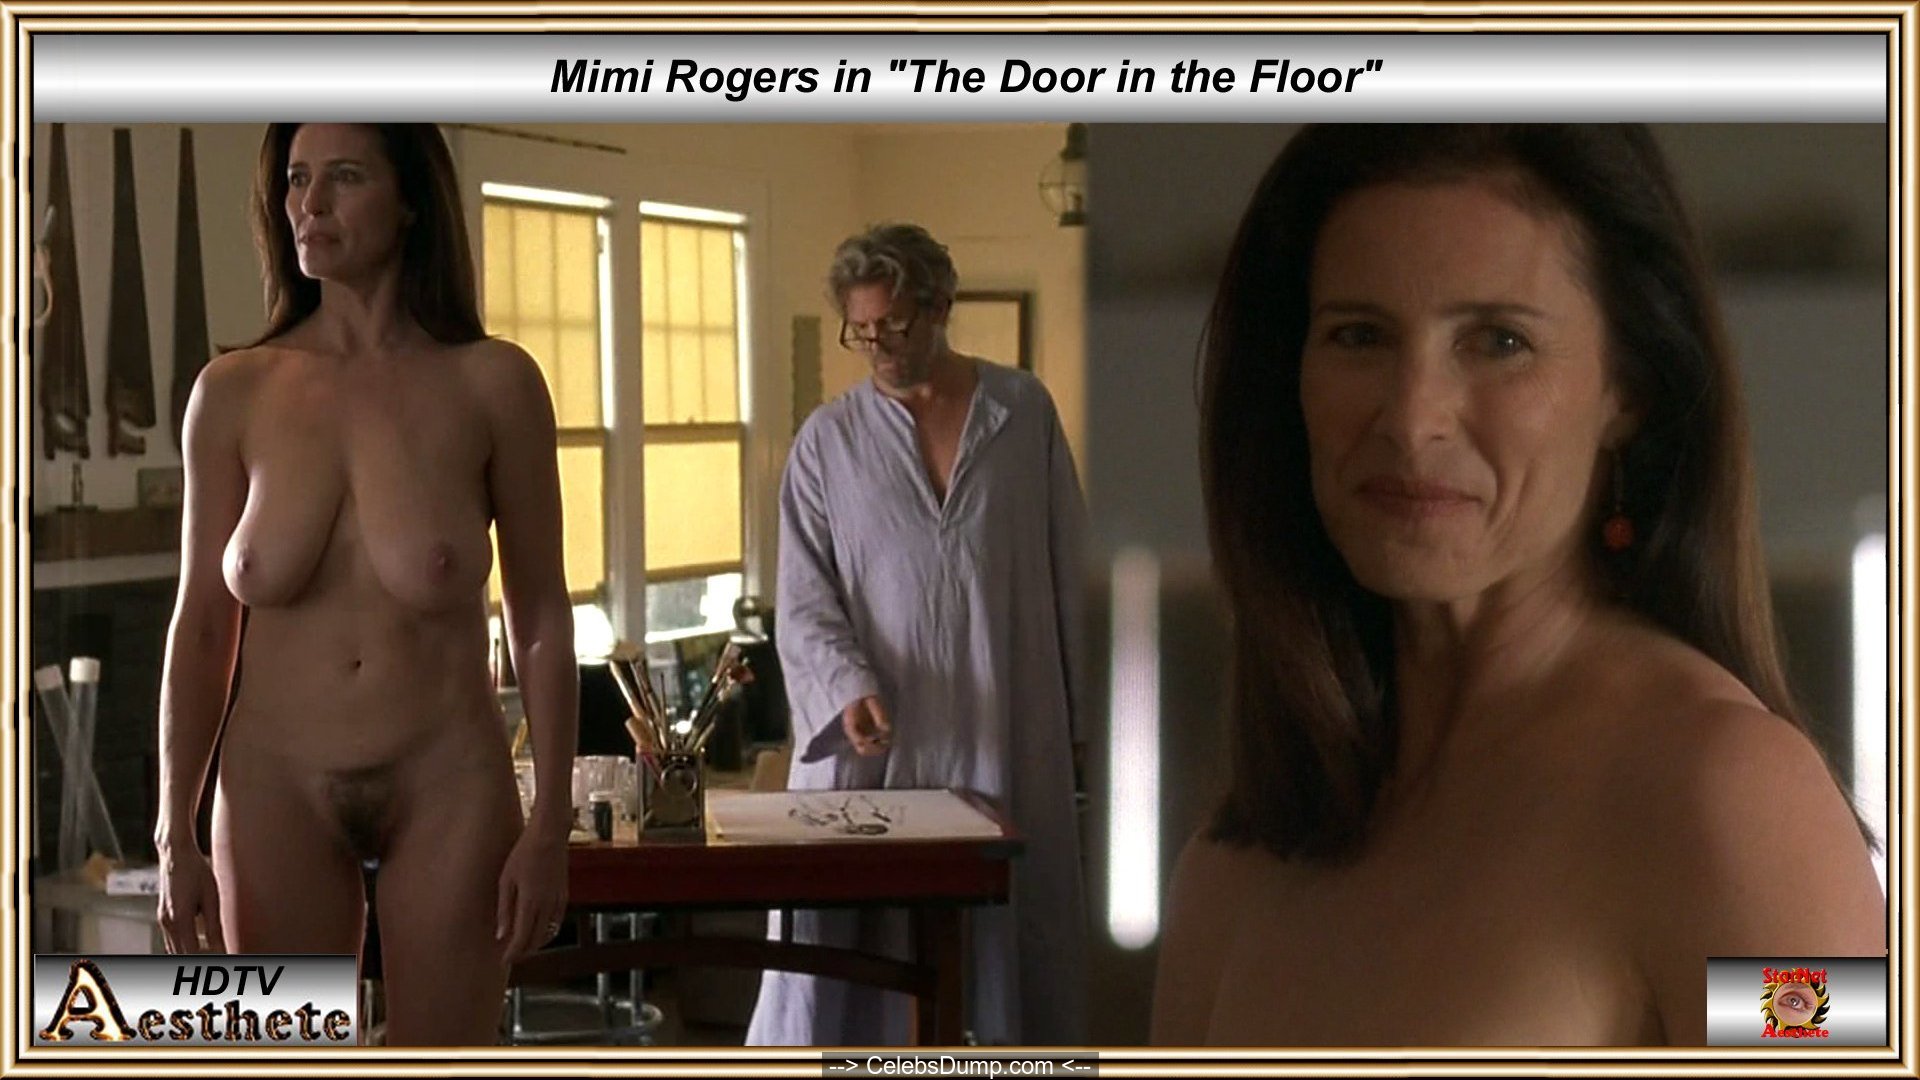 Busty Mimi Rogers naked movie scenes.